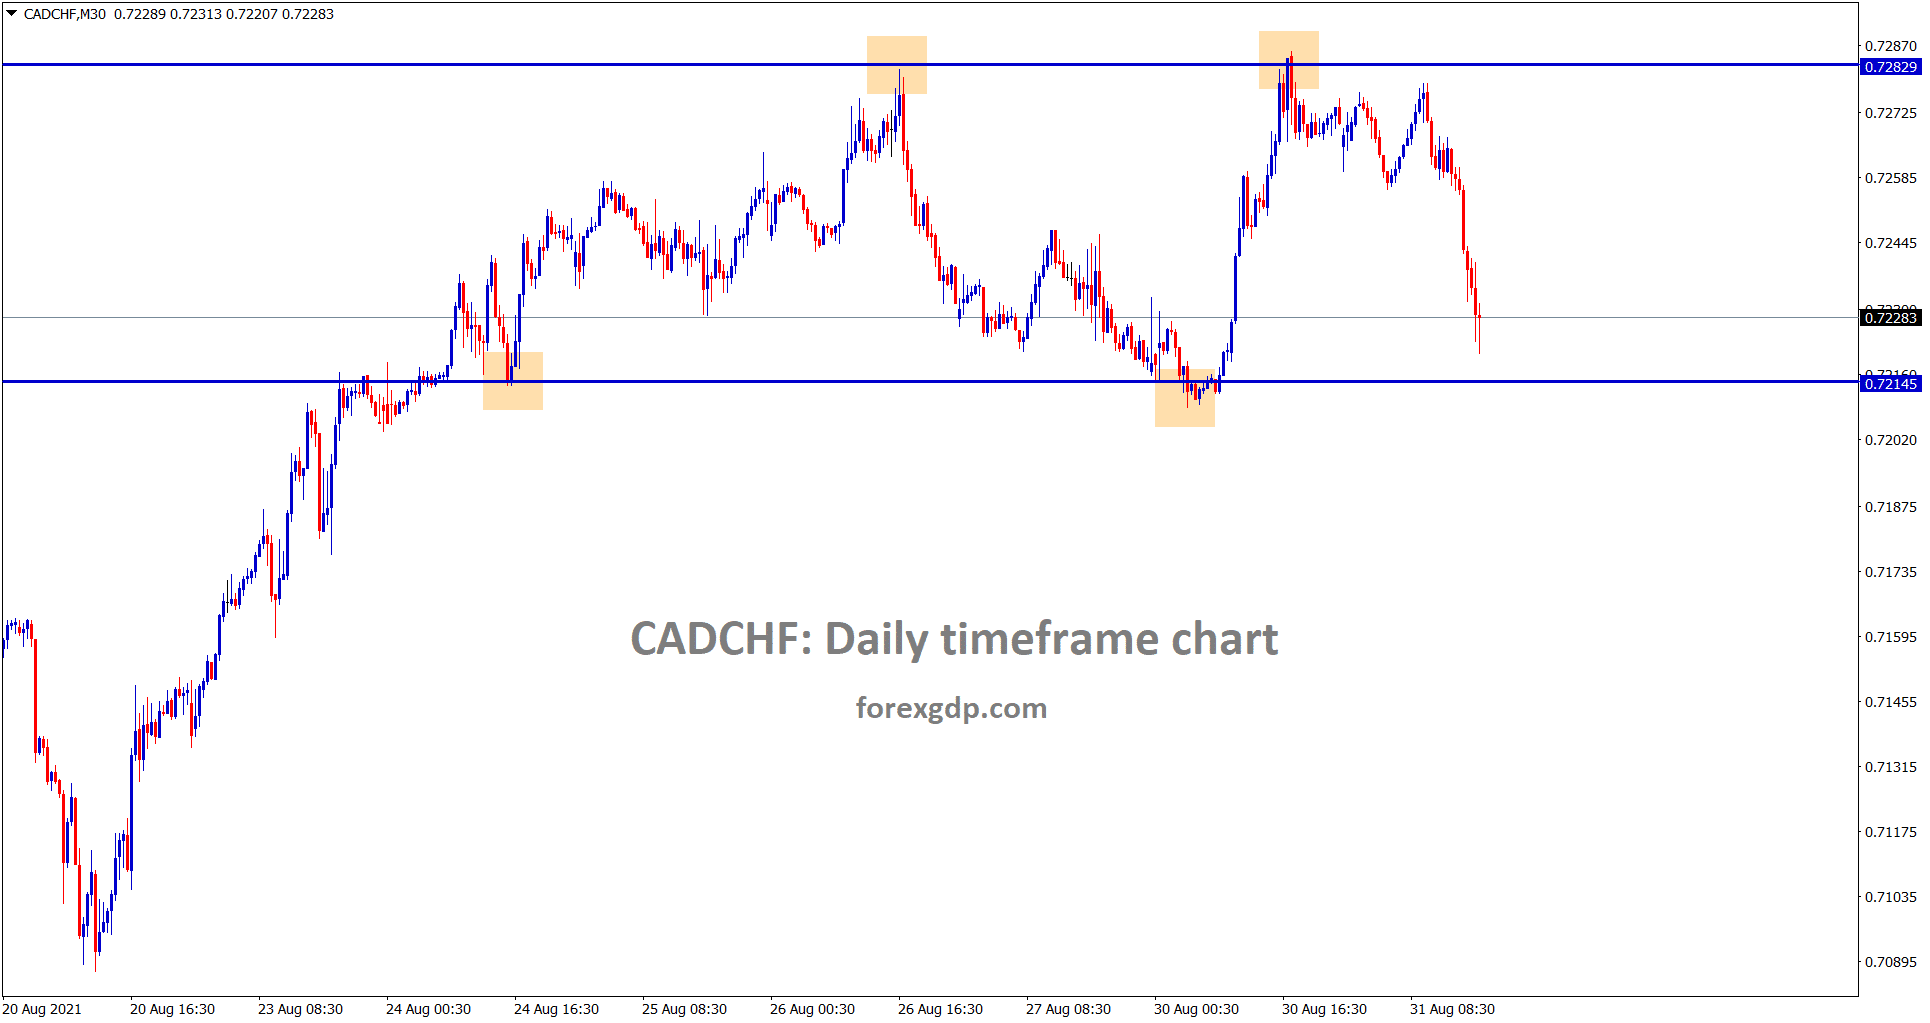 CADCHF is ranging now between the support and resistance areas